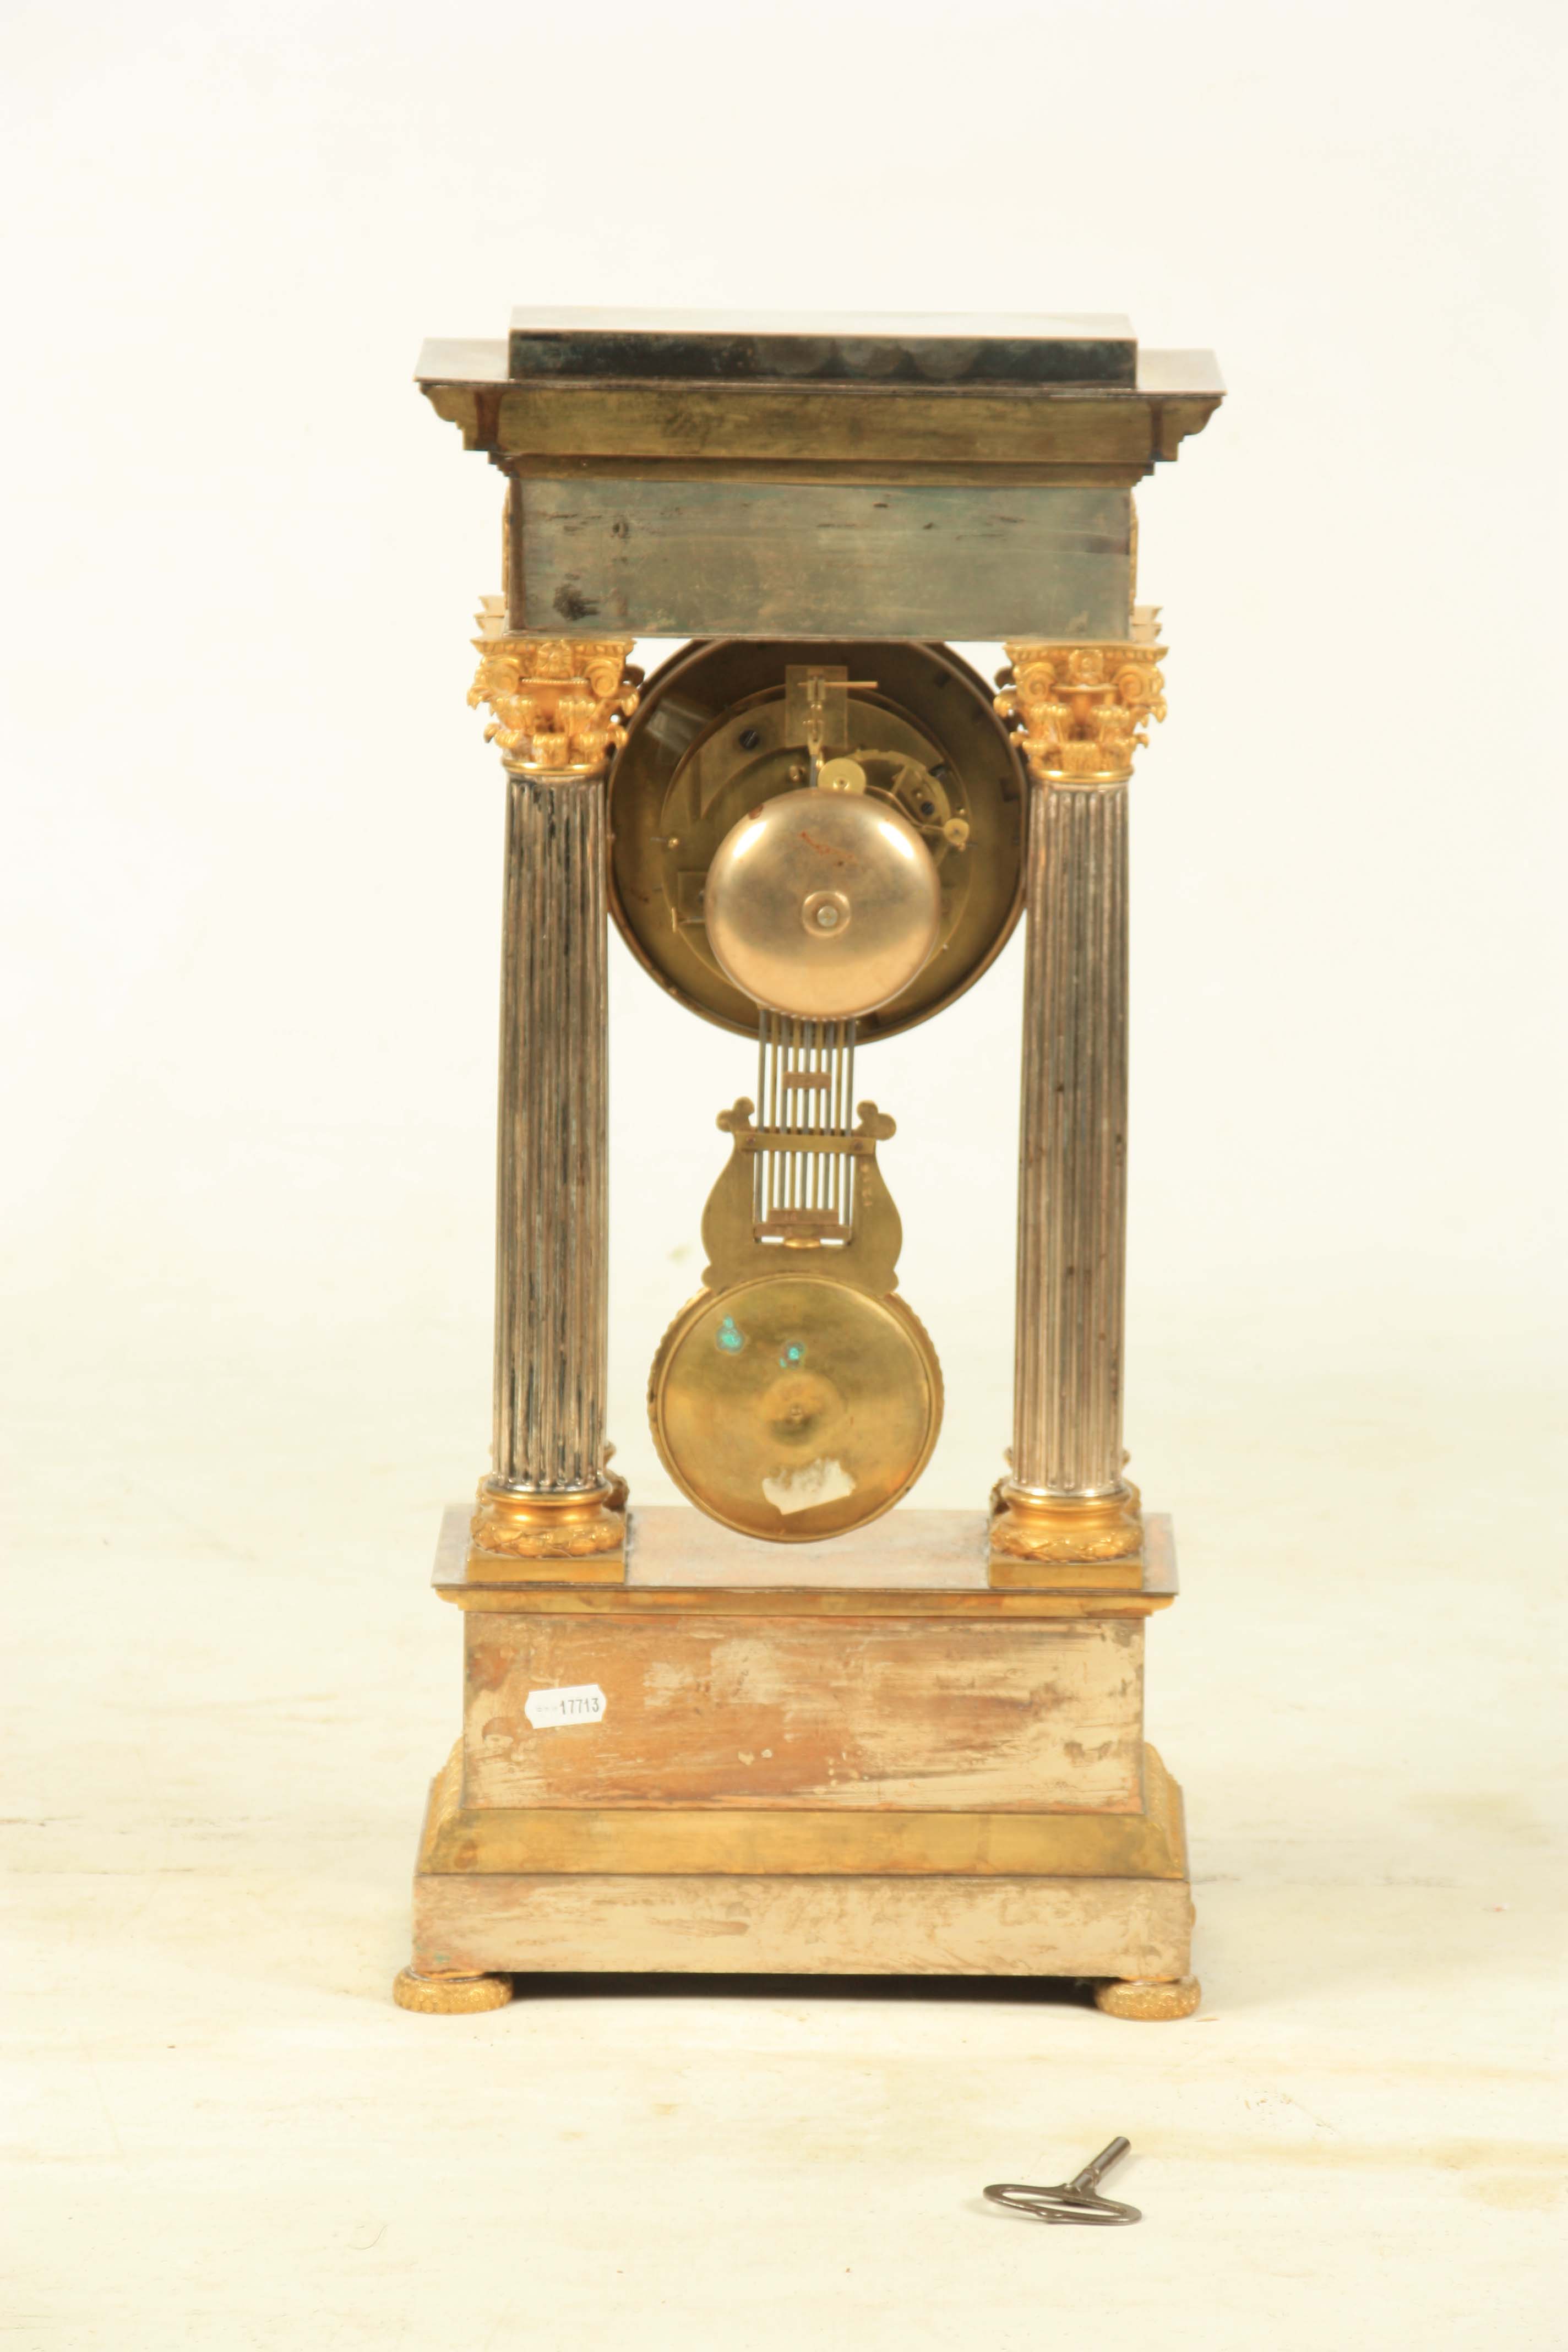 J.B. ROEMAET, A GRAND. A MID 19TH CENTURY FRENCH ORMOLU AND SILVERED PORTICO MANTEL CLOCK the case - Image 4 of 6